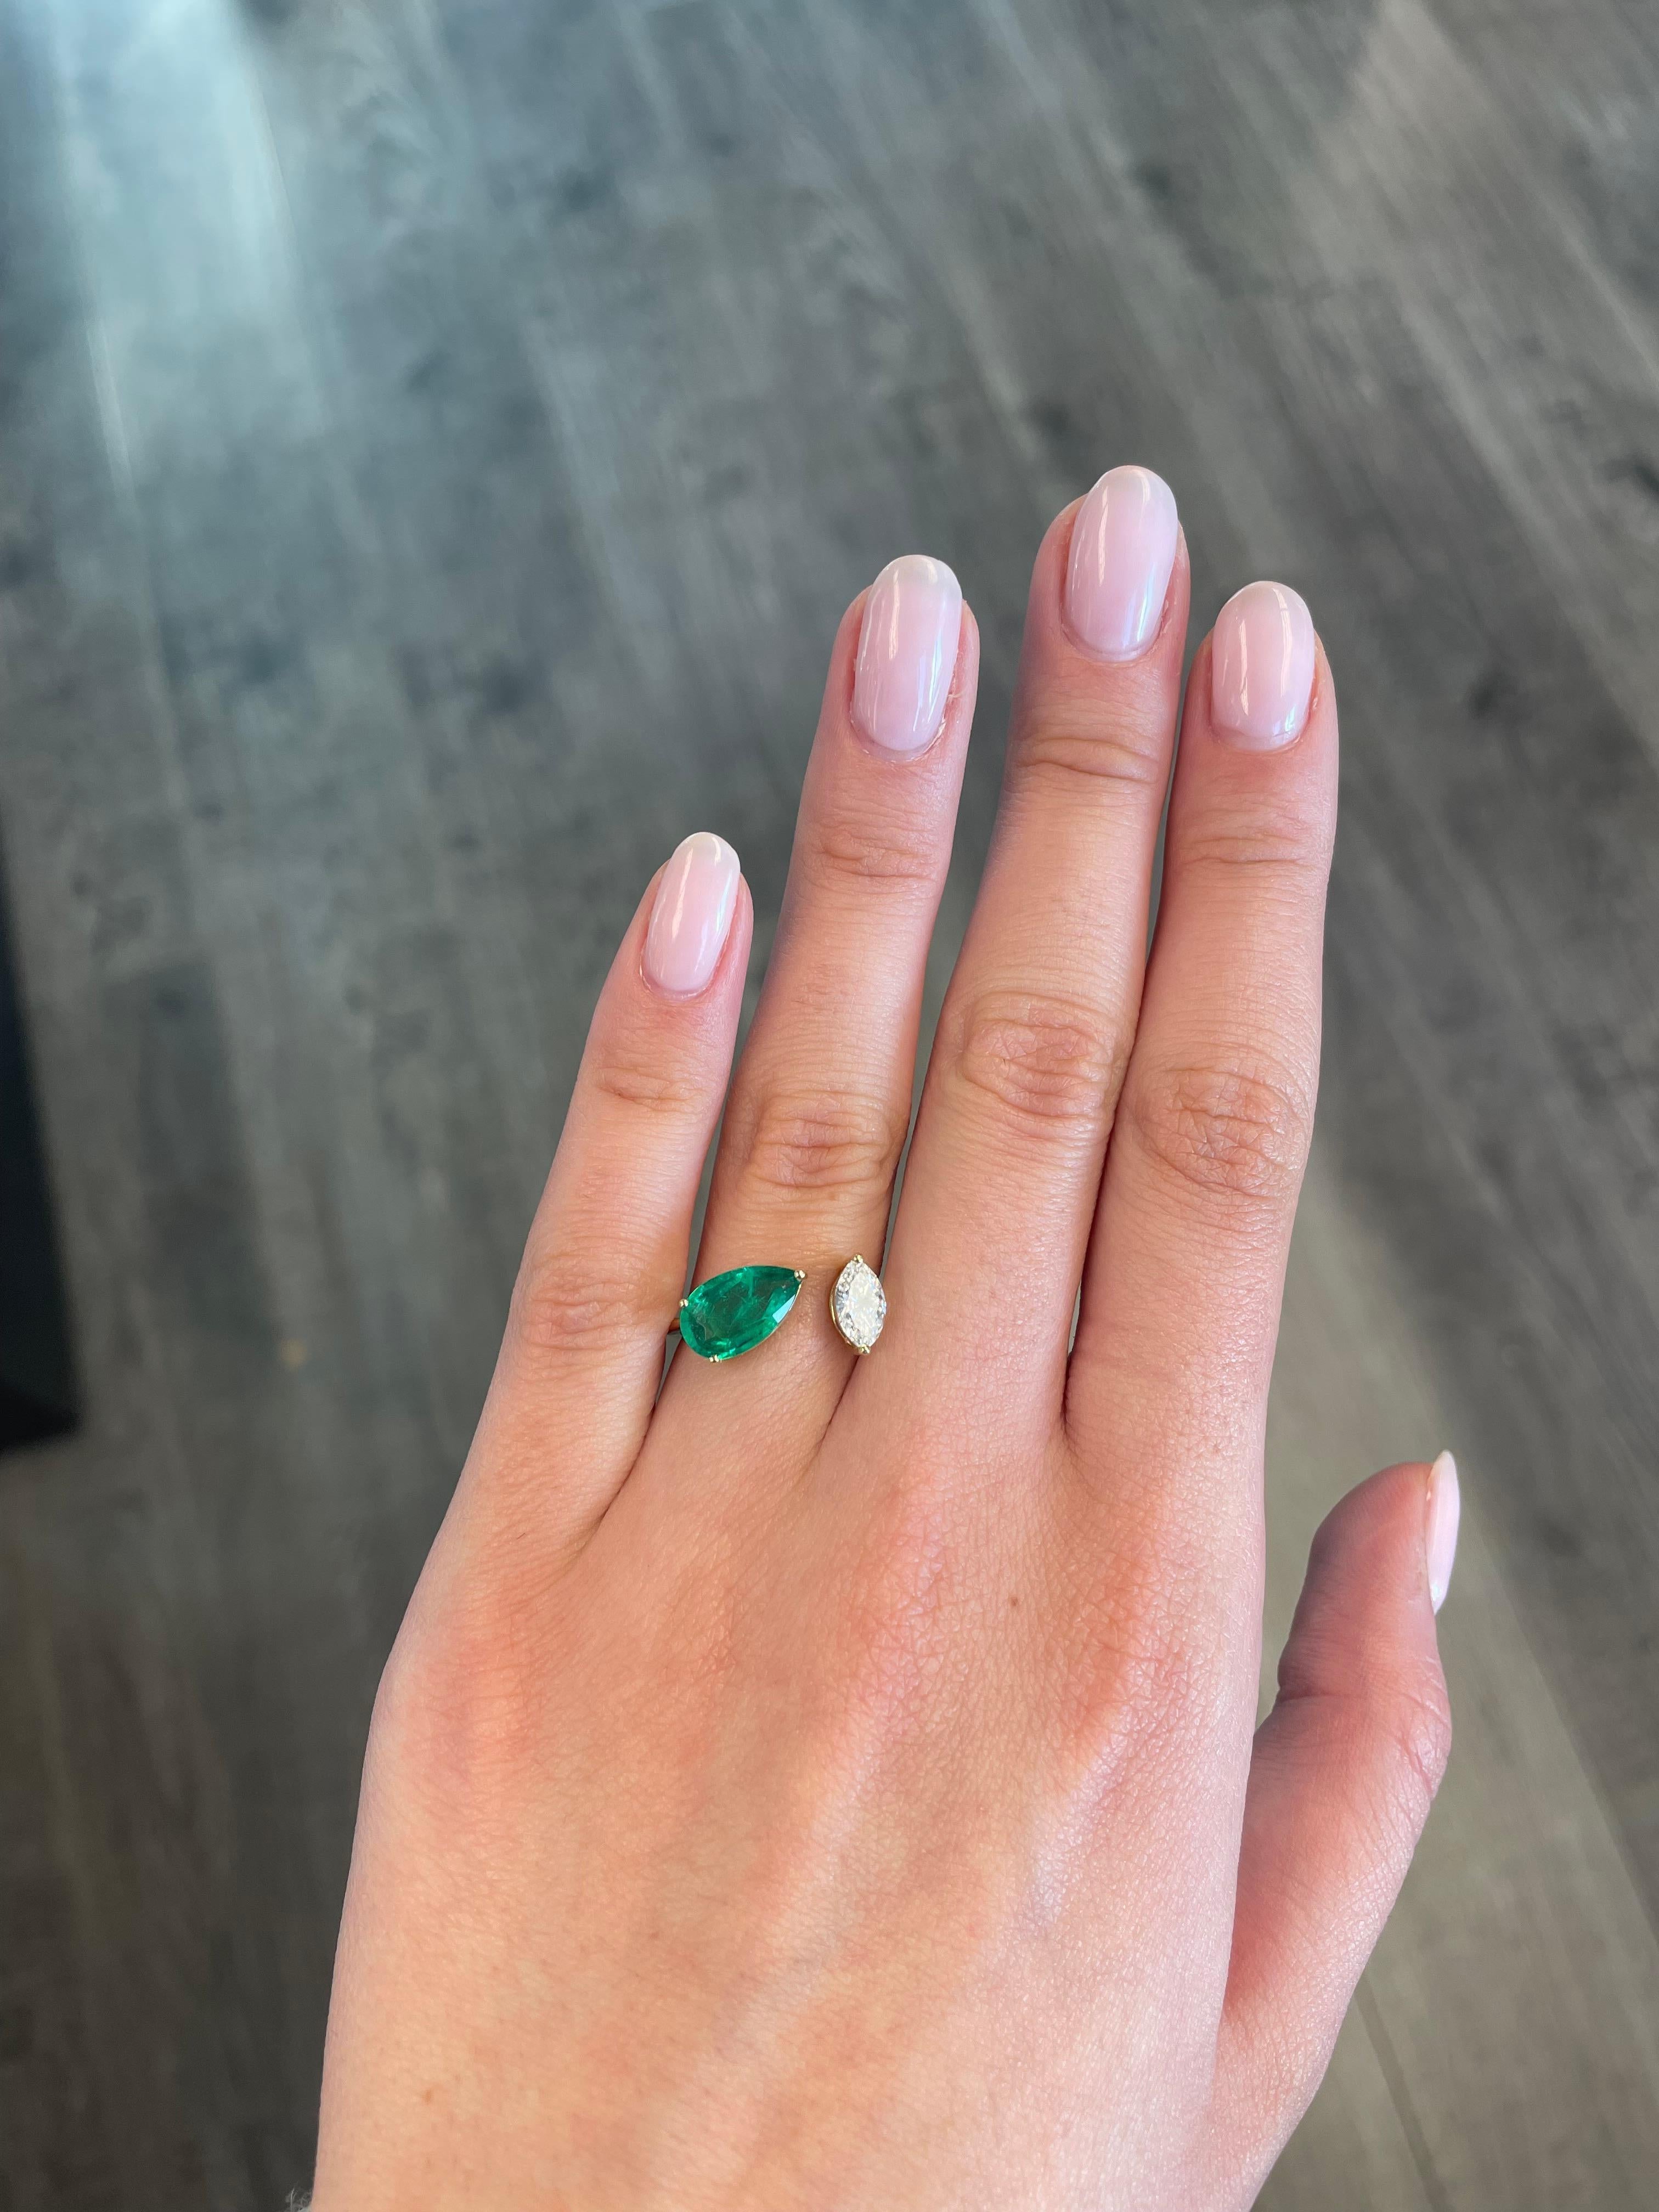 Stunning modern floating emerald and diamond toi et moi ring. By Alexander Beverly Hills.
1.67carat pear shape emerald. 0.52 carat marques cut diamond, approximately G/H color, and VS clarity. 18-karat yellow gold, 3.57 grams, current ring size